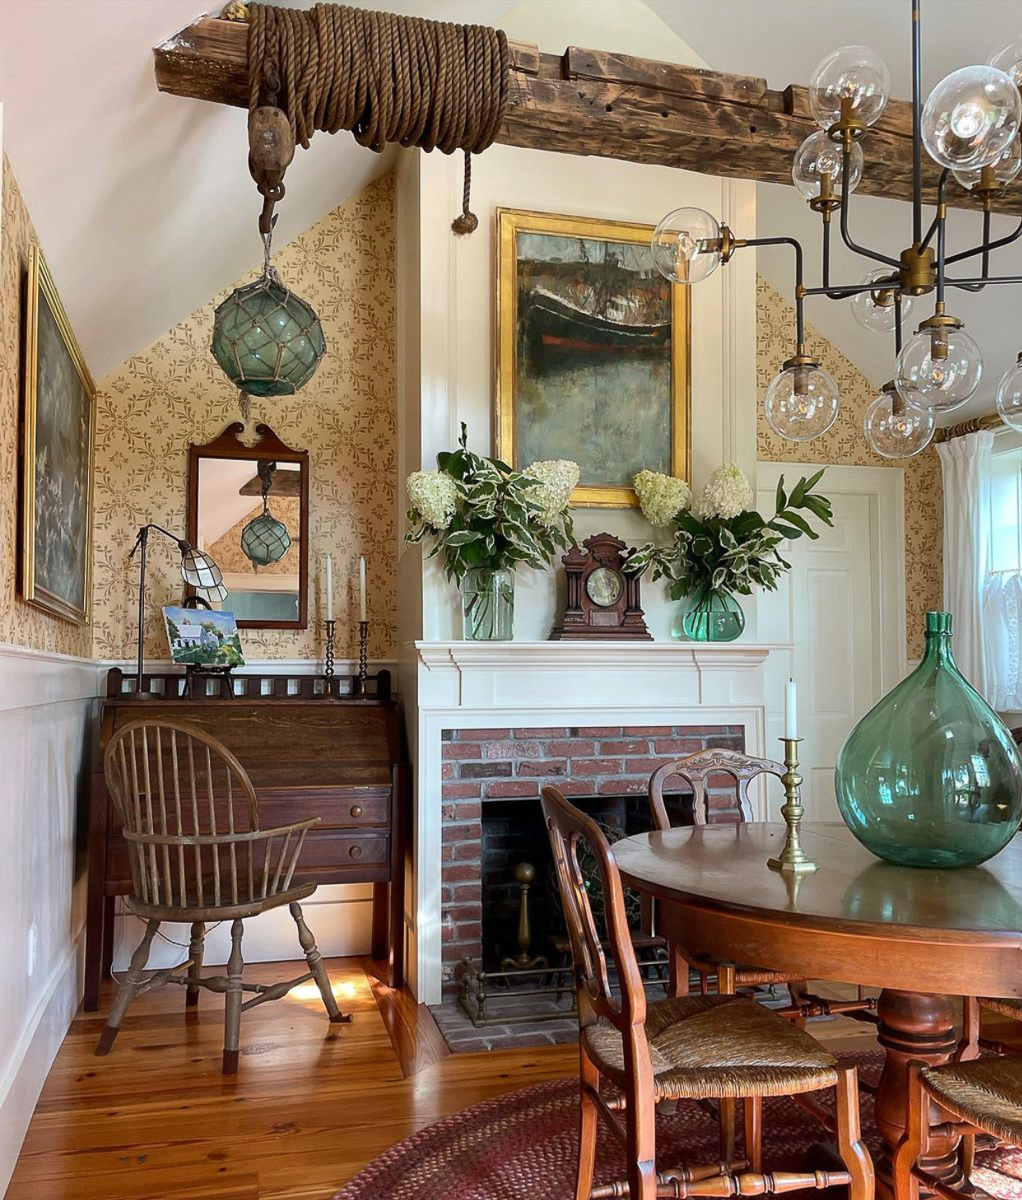 Eclectic Home Tour - The Groggy Anchor - tour this charming early 1800's seaside cottage filled with antiques and nautical inspiration 